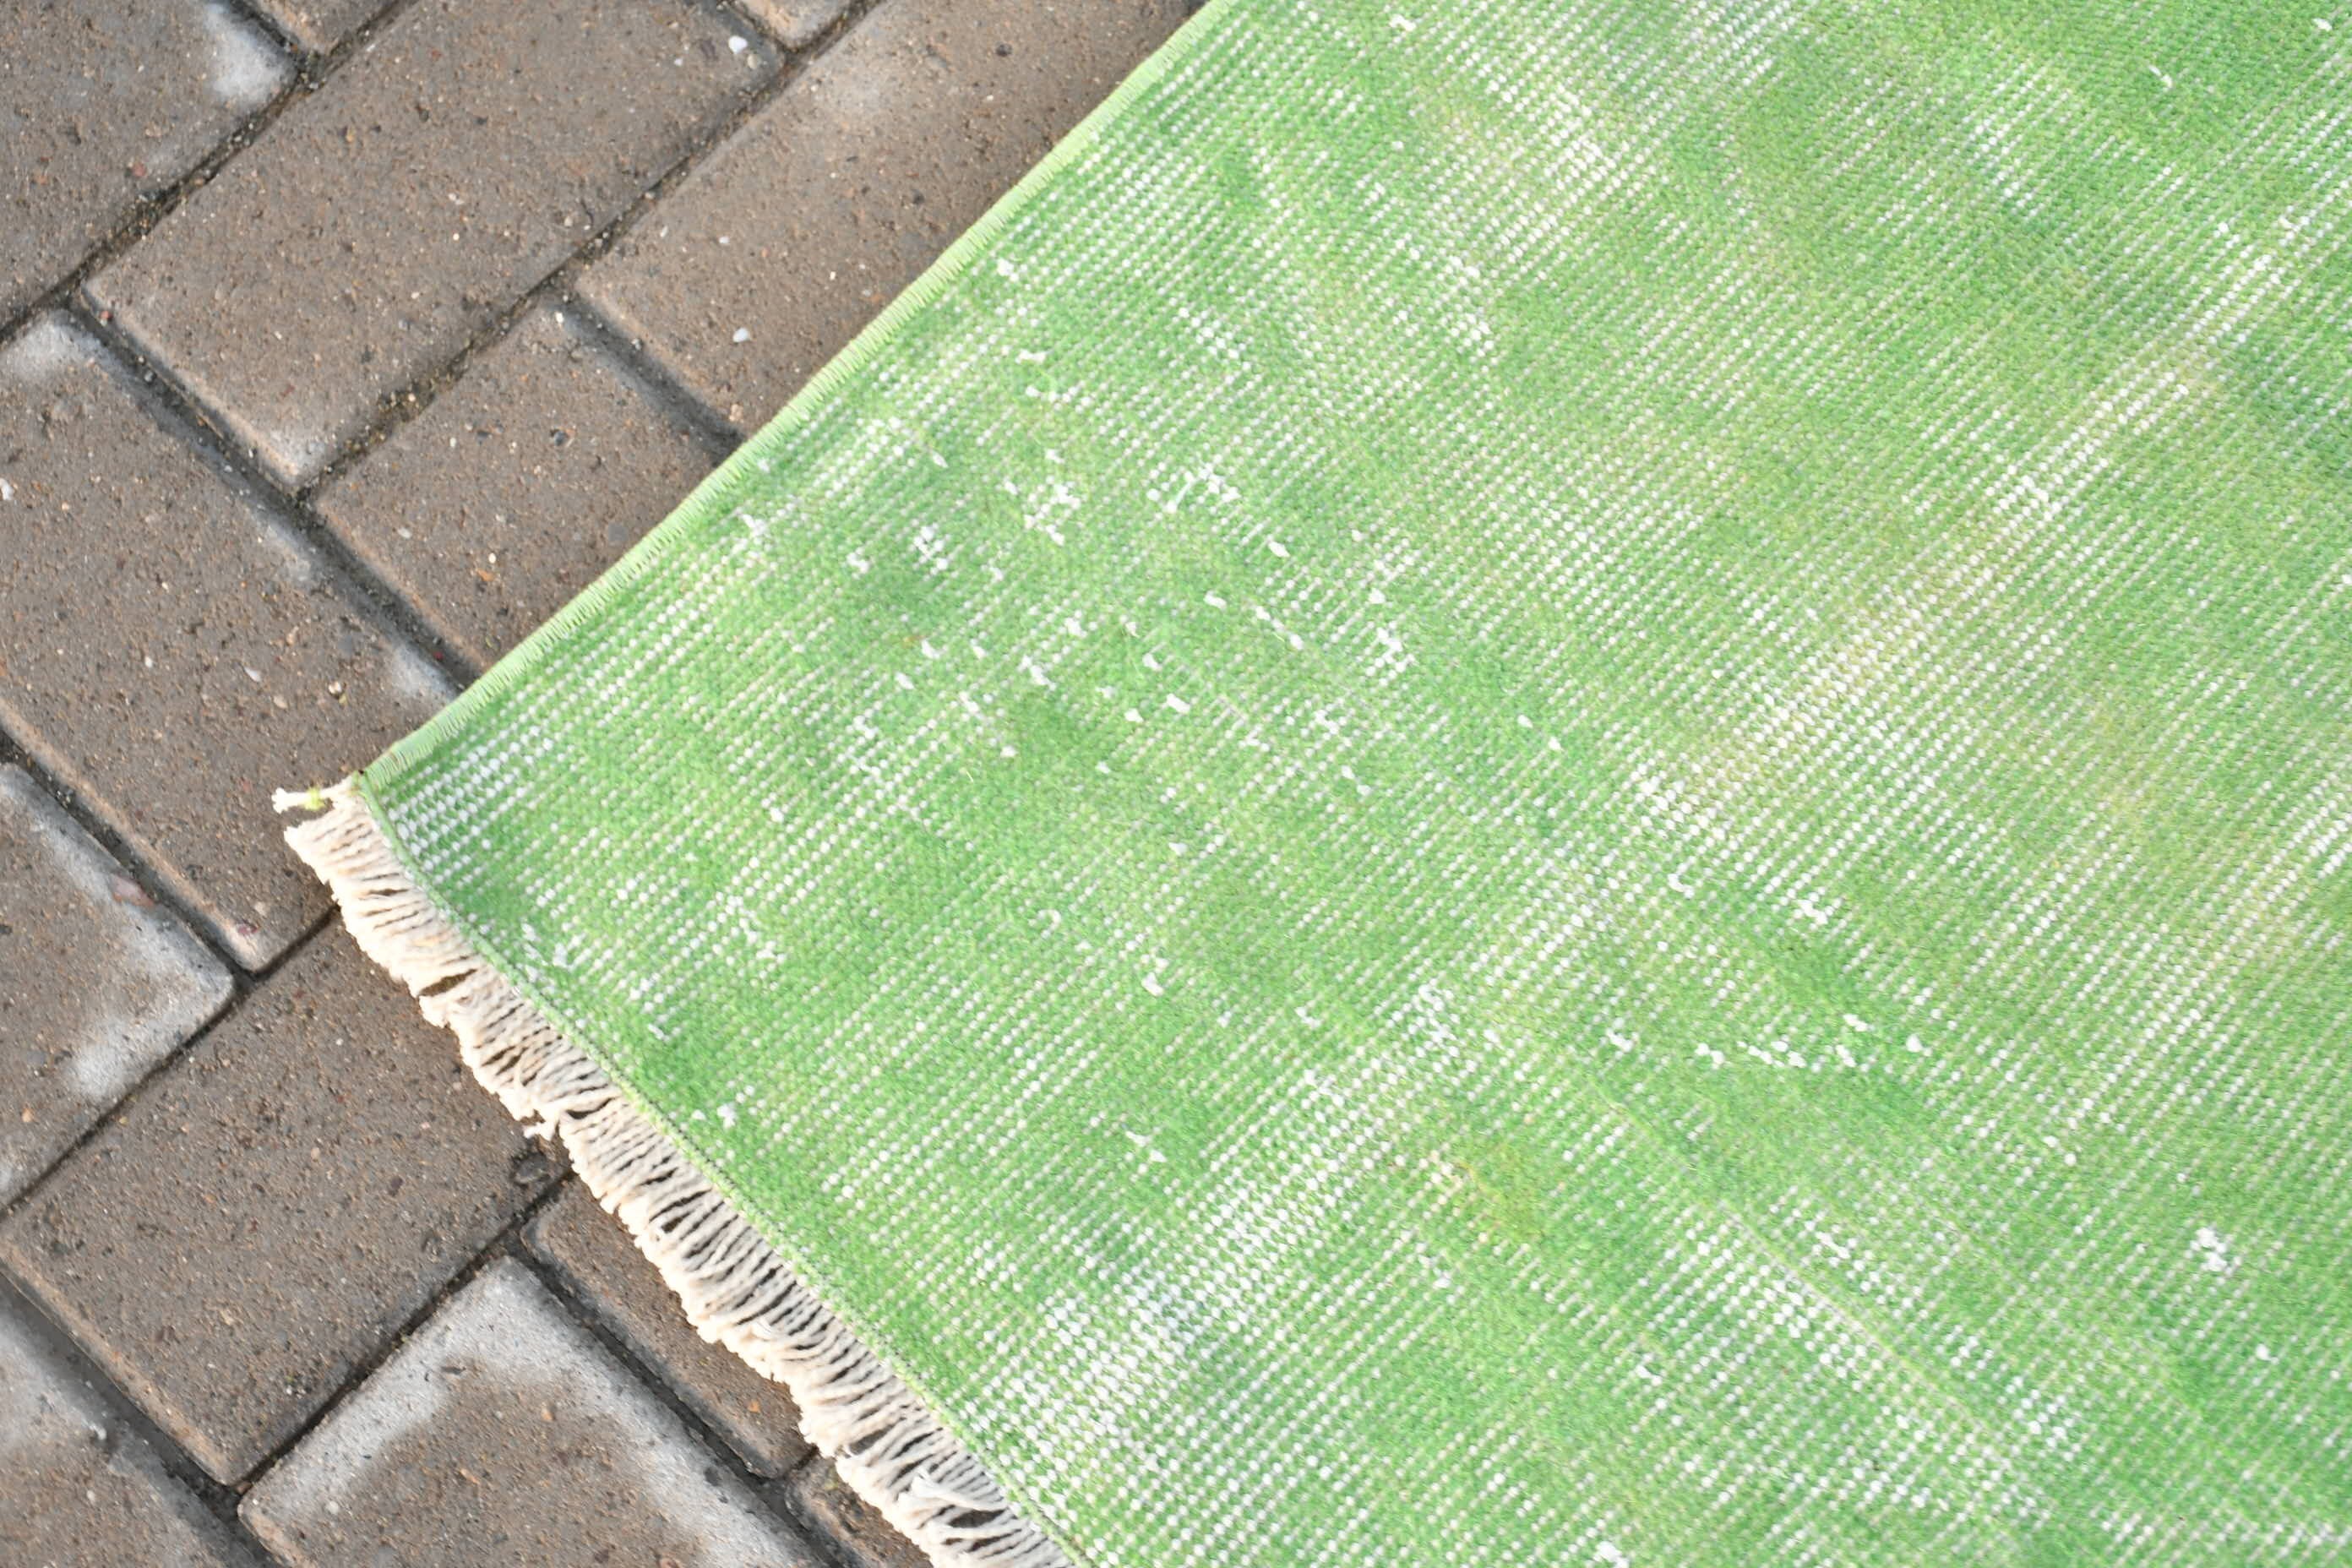 Wool Rug, Vintage Rug, Kitchen Rug, Rugs for Bedroom, Green Cool Rugs, Vintage Decor Rug, 2.8x6.7 ft Accent Rugs, Entry Rug, Turkish Rugs